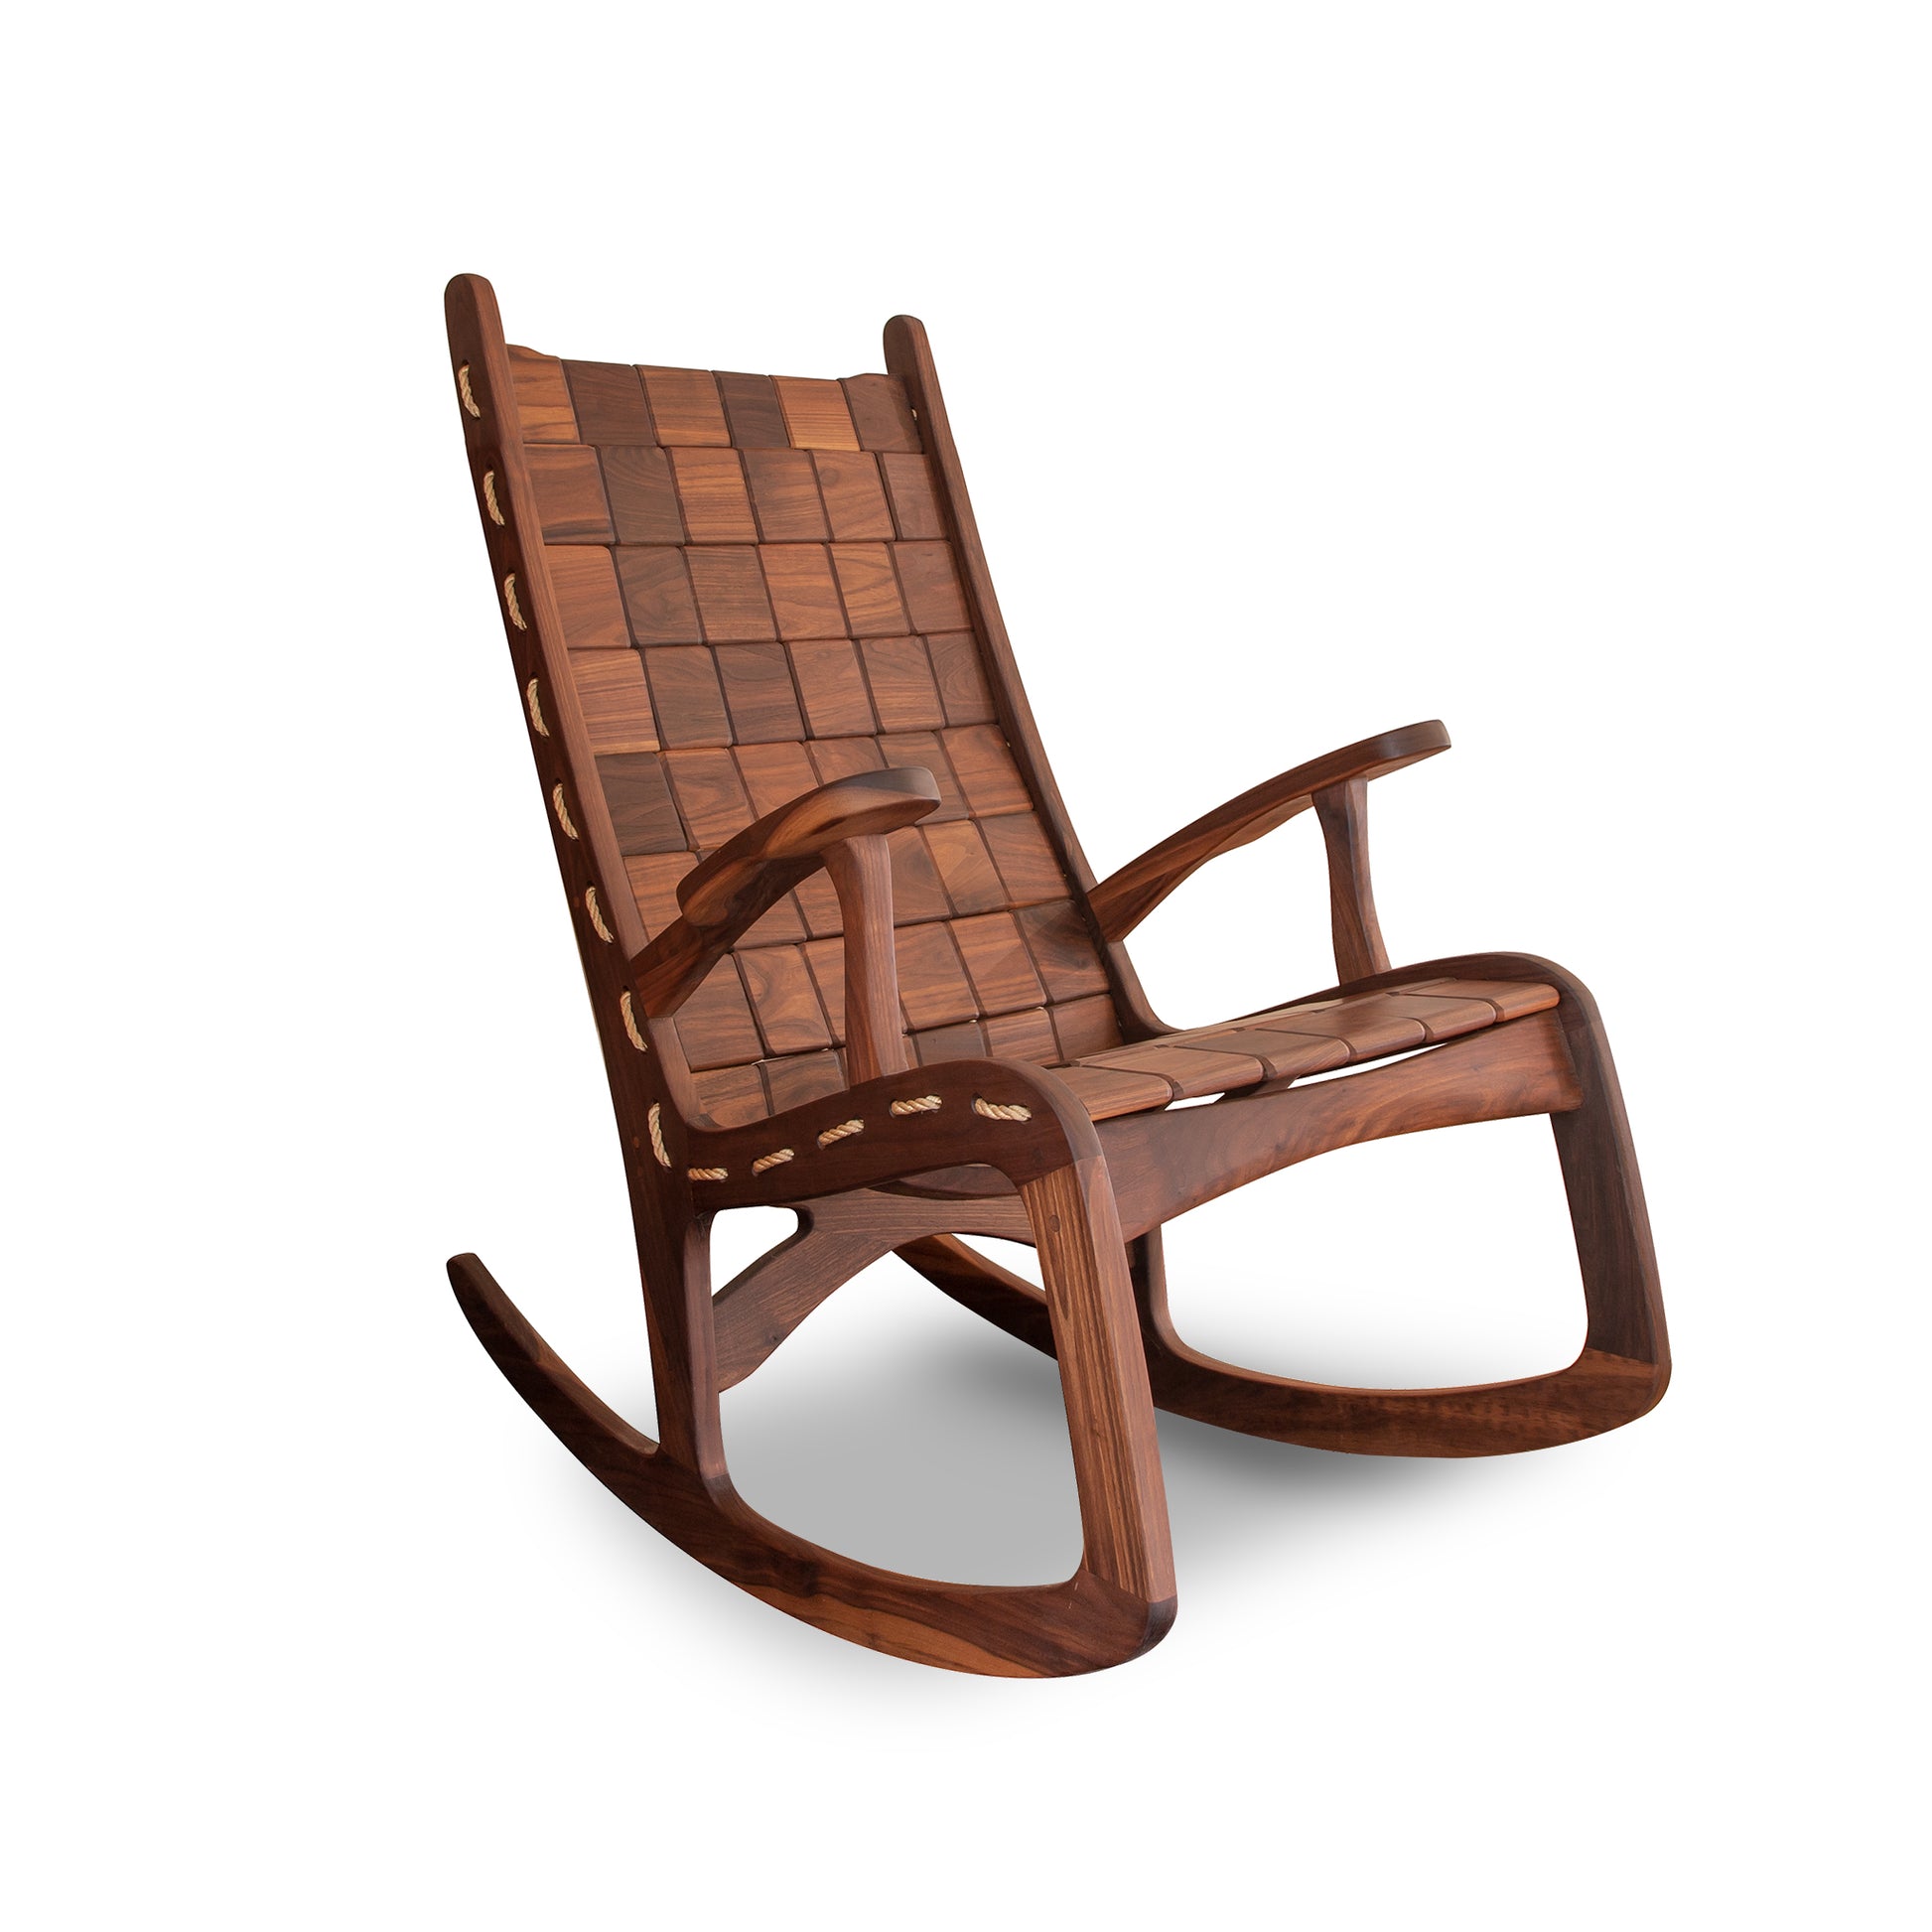 A wooden rocking chair with a woven seat.